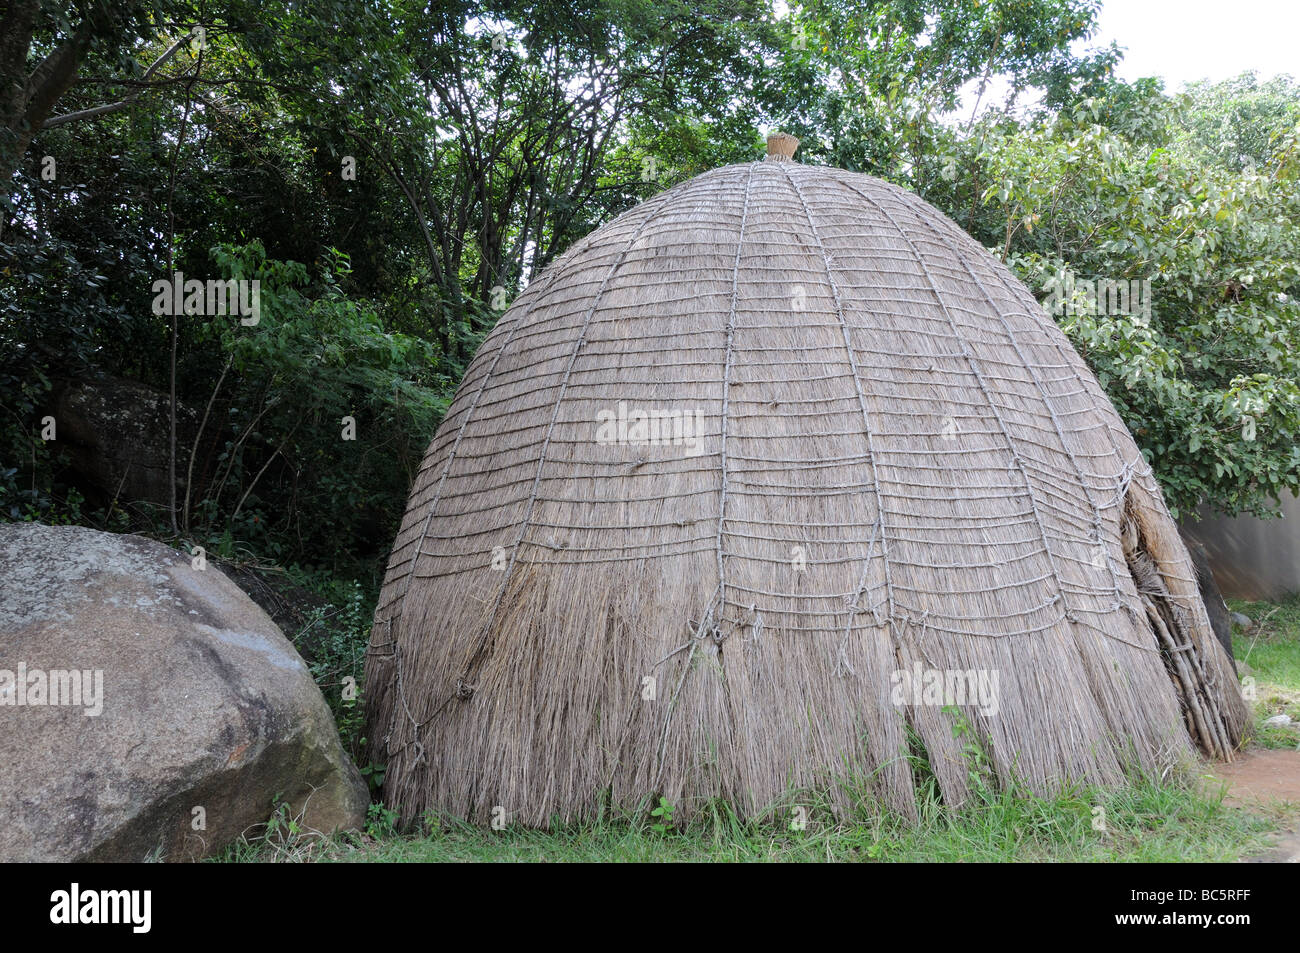 Traditional African Beehive Huts Swaziland Aouth Africa Stock Photo